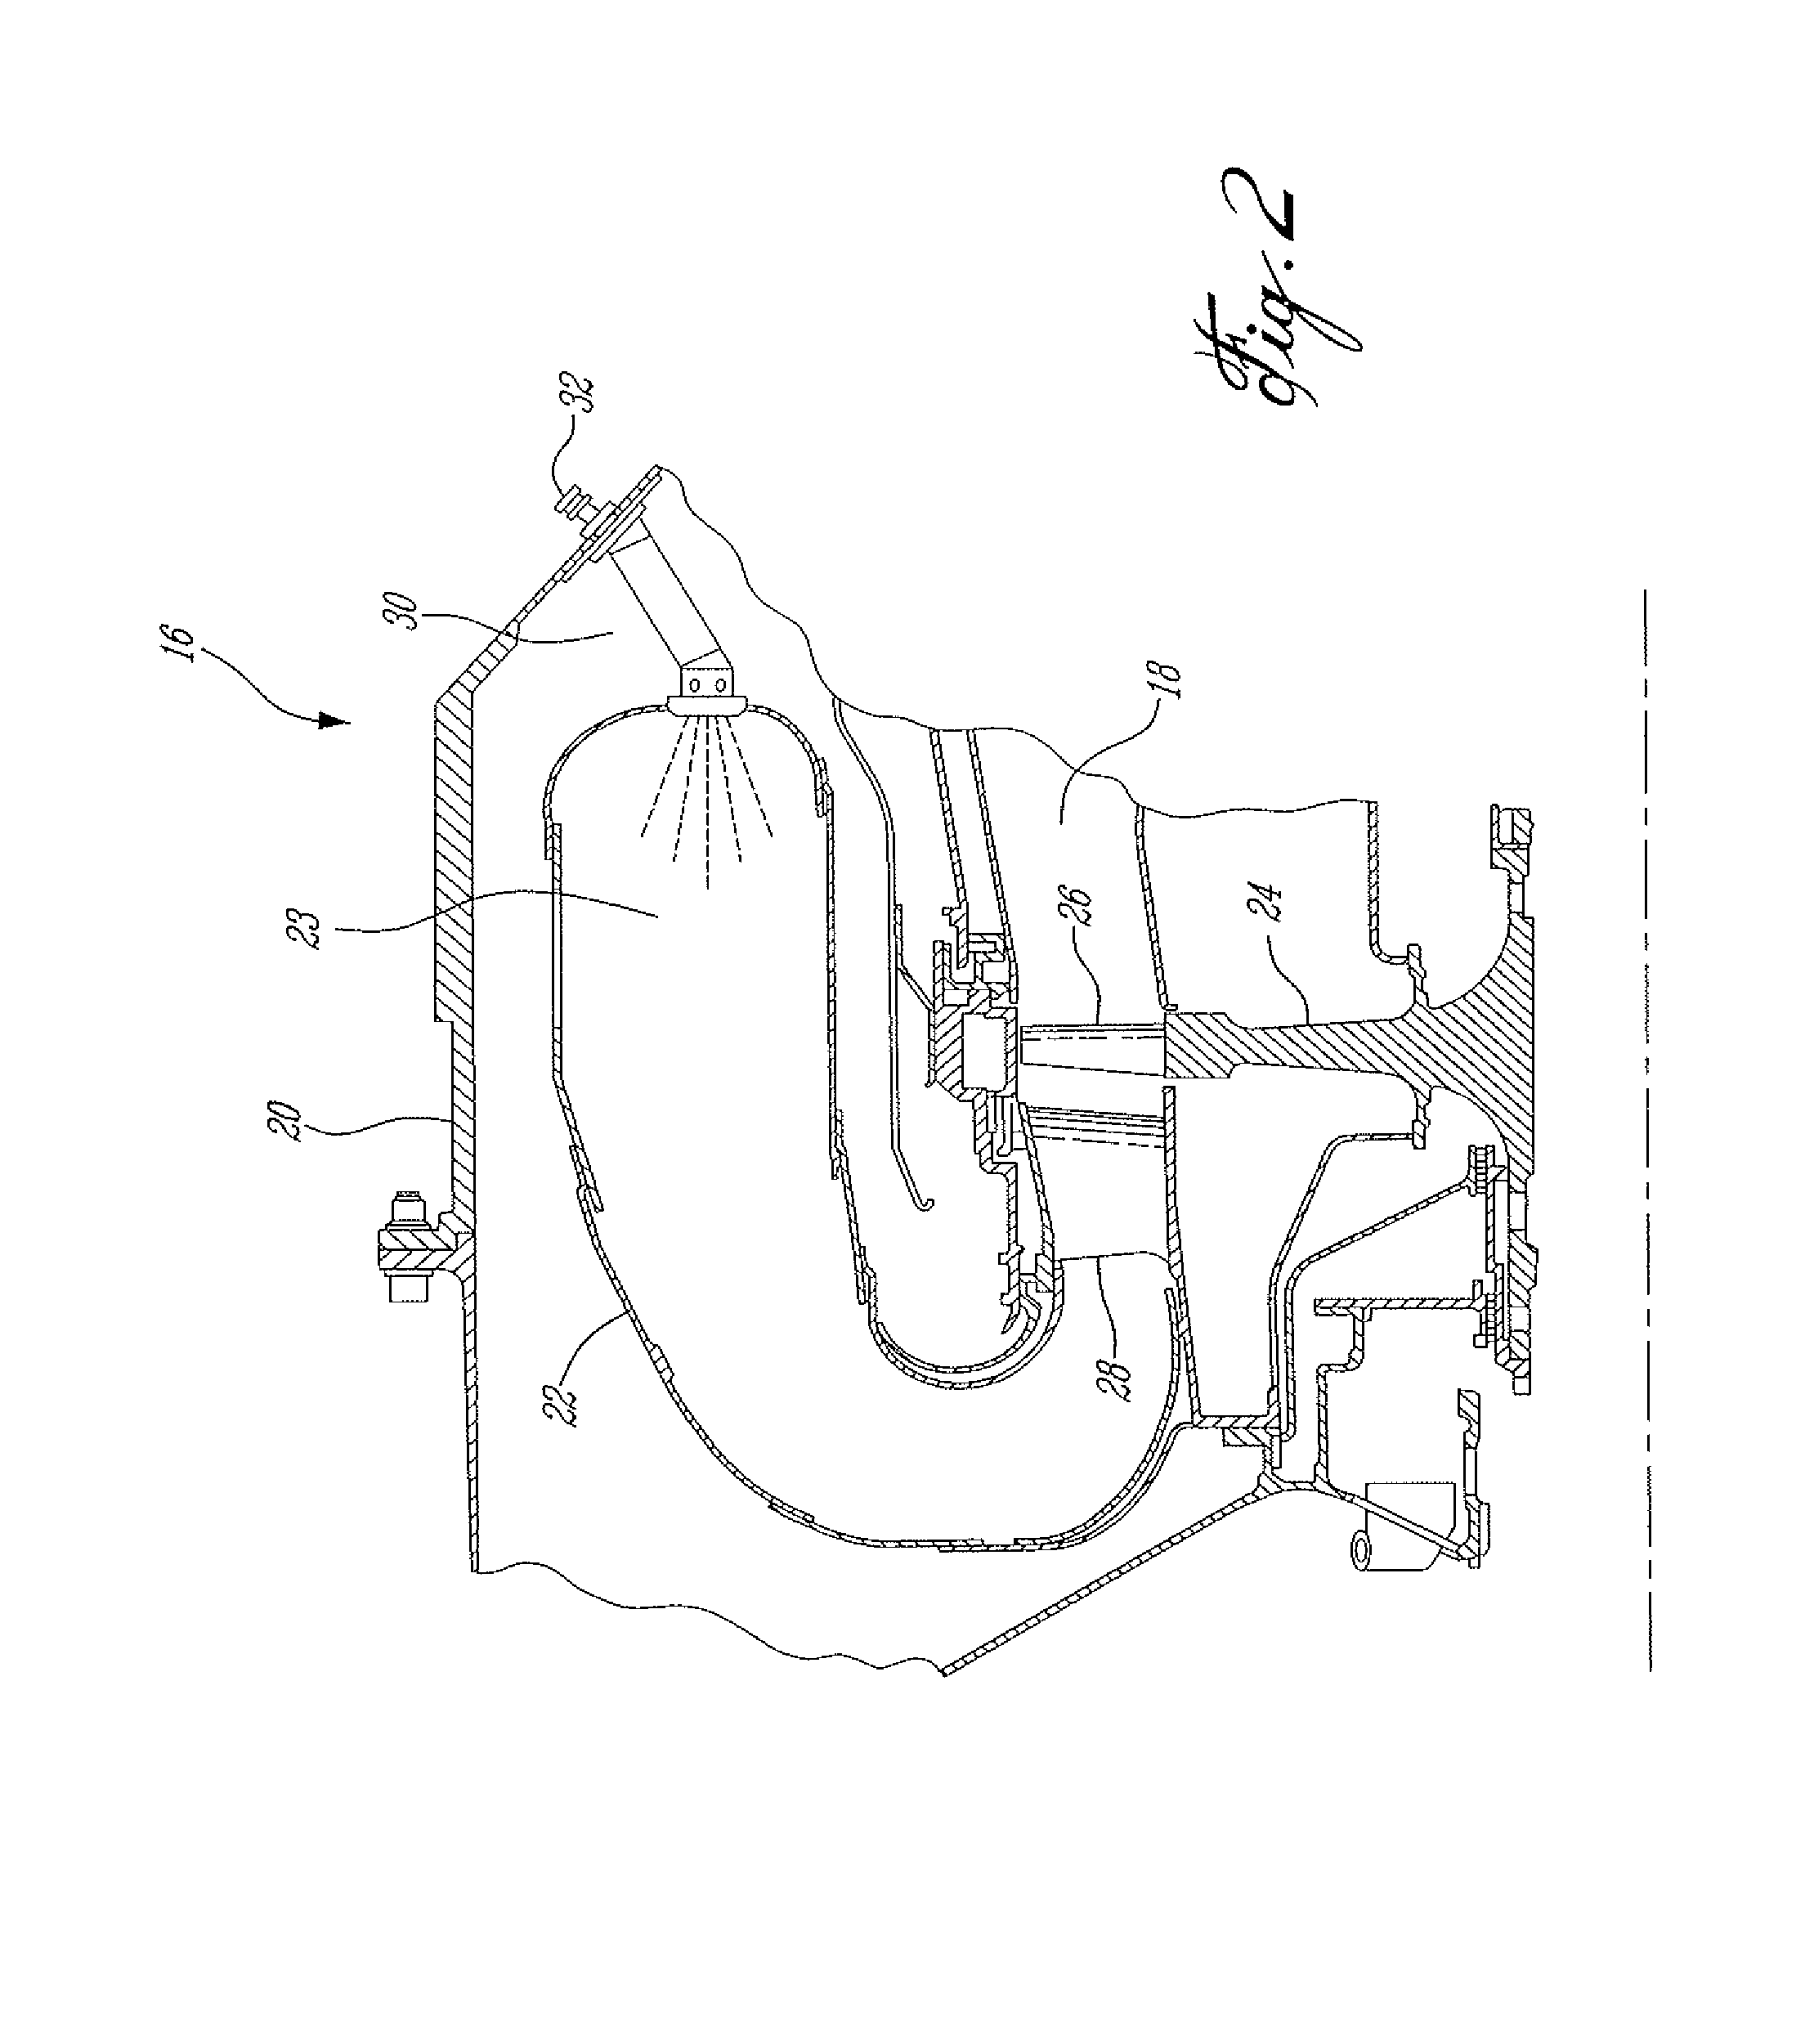 Helical channel fuel distributor and method